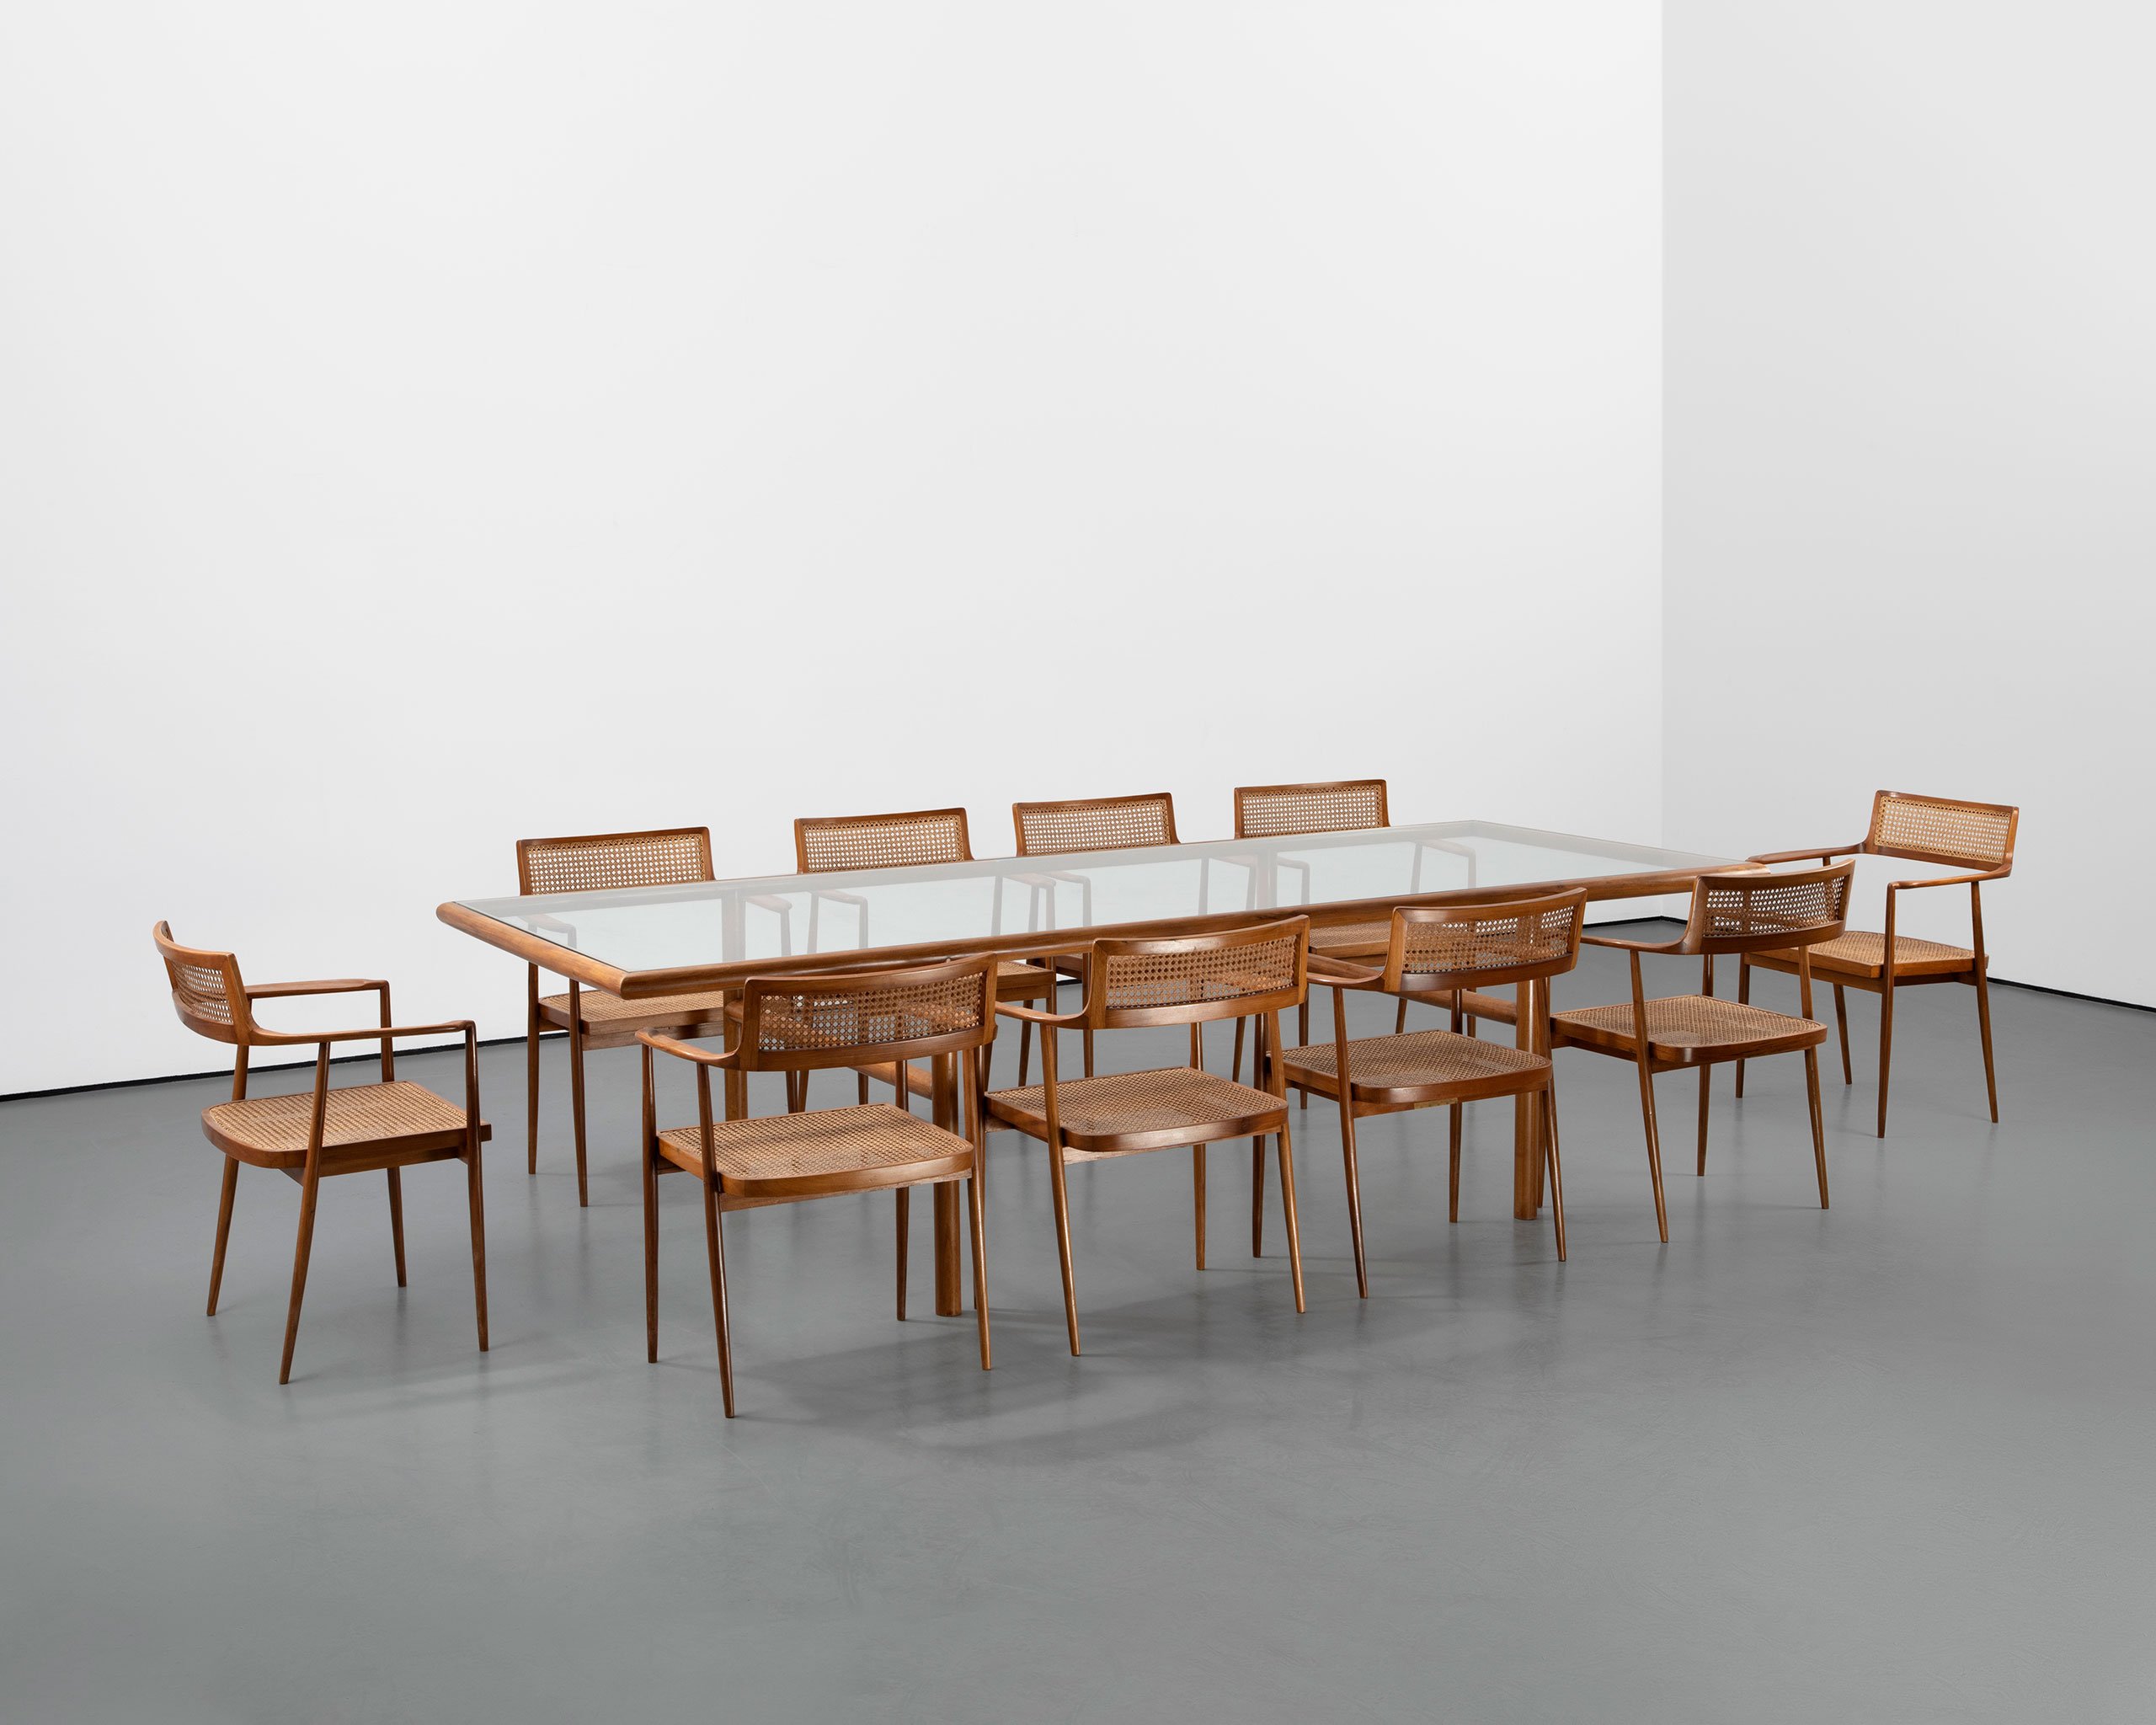 Dining table and chairs by Joaquim Tenreiro. Photography © Carpenters Workshop Gallery.